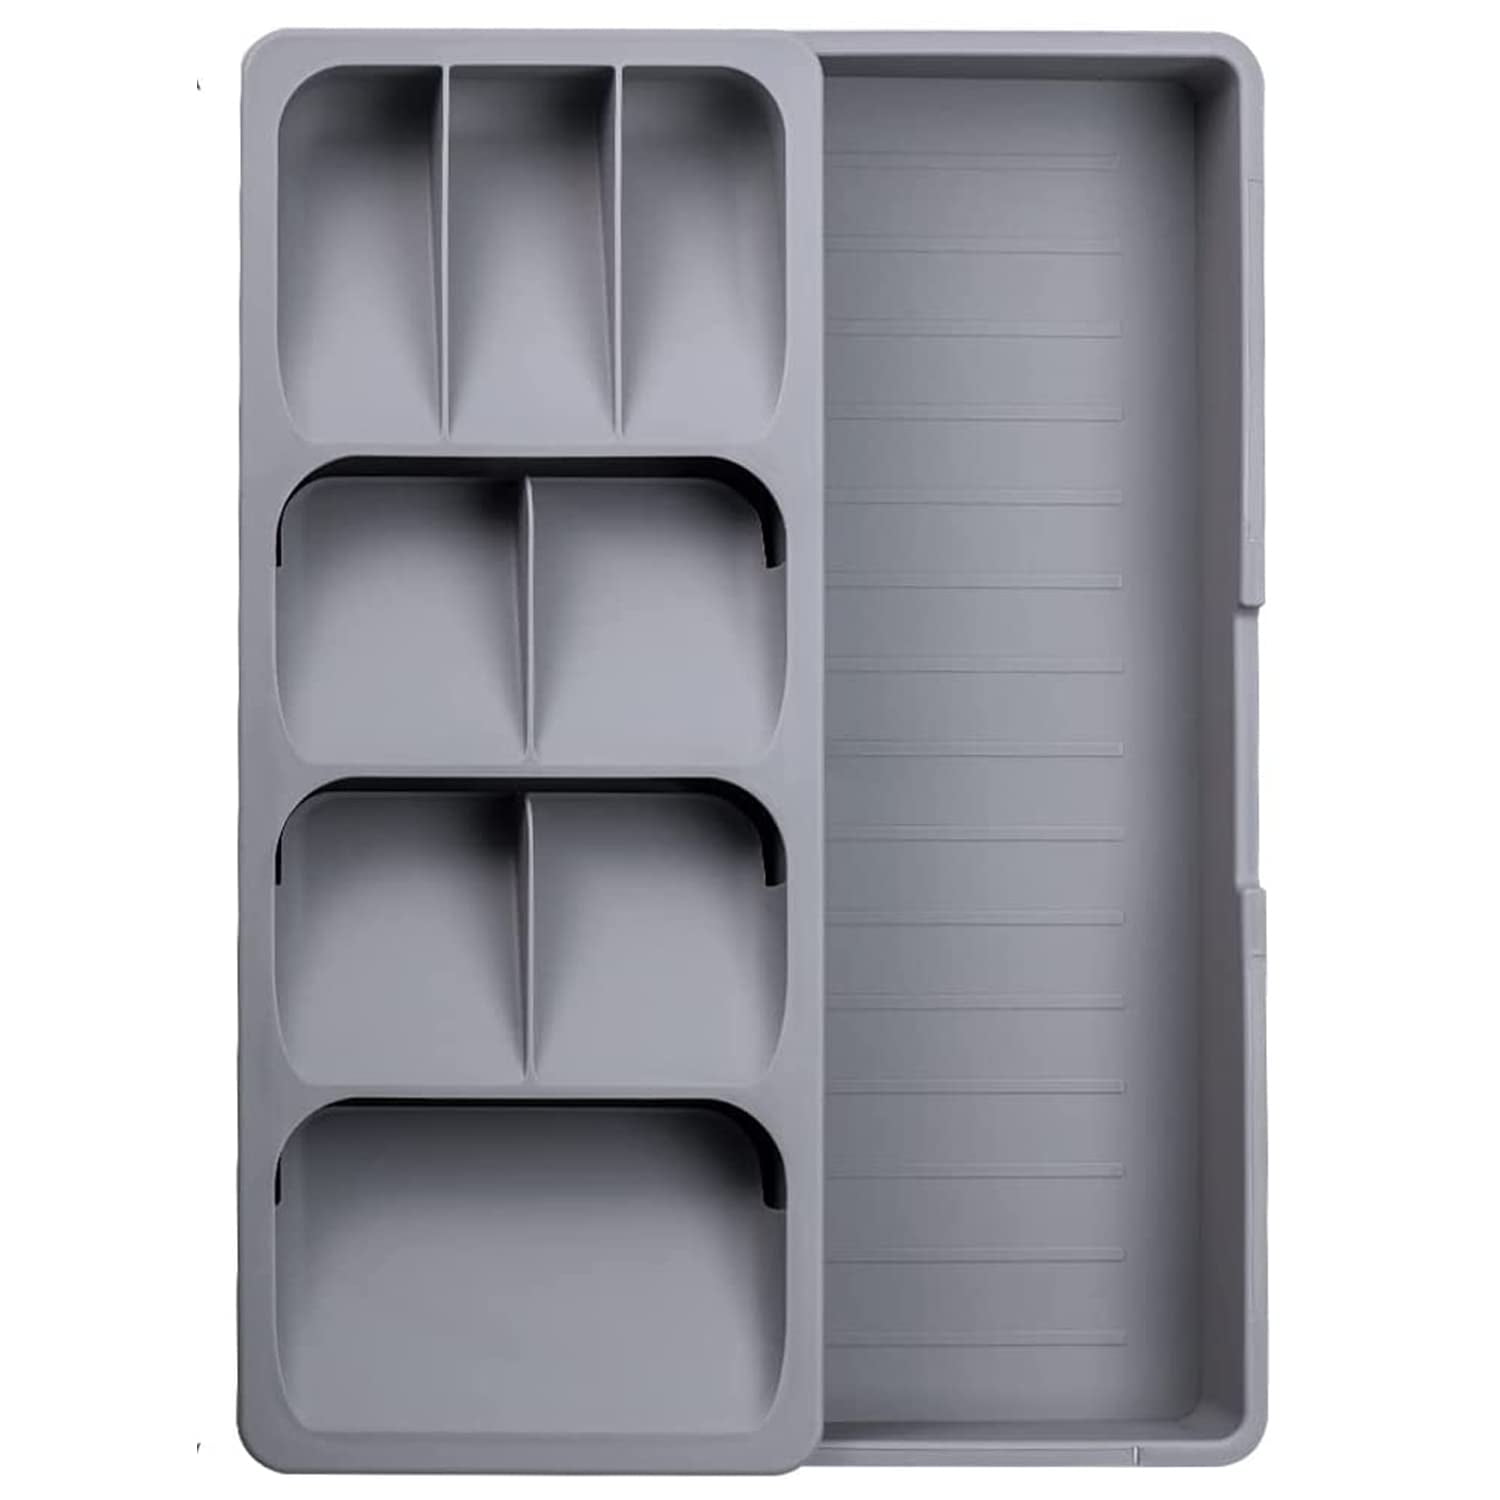 KitchenEdge Adjustable Kitchen Drawer Organizer for Utensils and Junk, Expandable 16 to 28 Inches Wide, 9 Compartments, Food-Safe Contract Grade